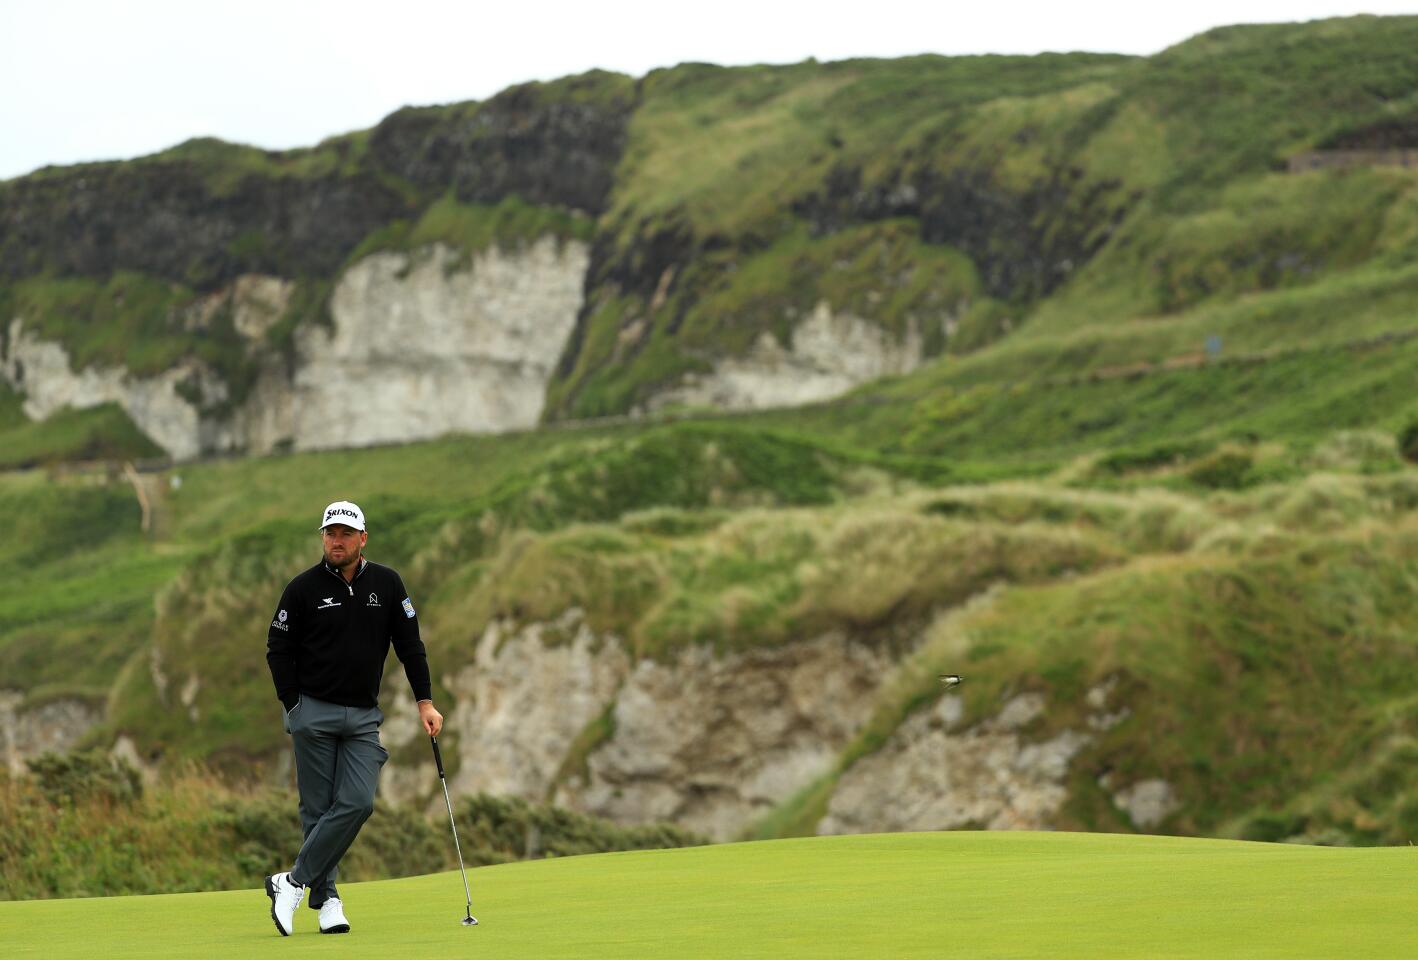 Graeme McDowell of Northern Ireland waits to play on the fifth green during the first round of the 148th Open Championship at Royal Portrush Golf Club in Northern Ireland.